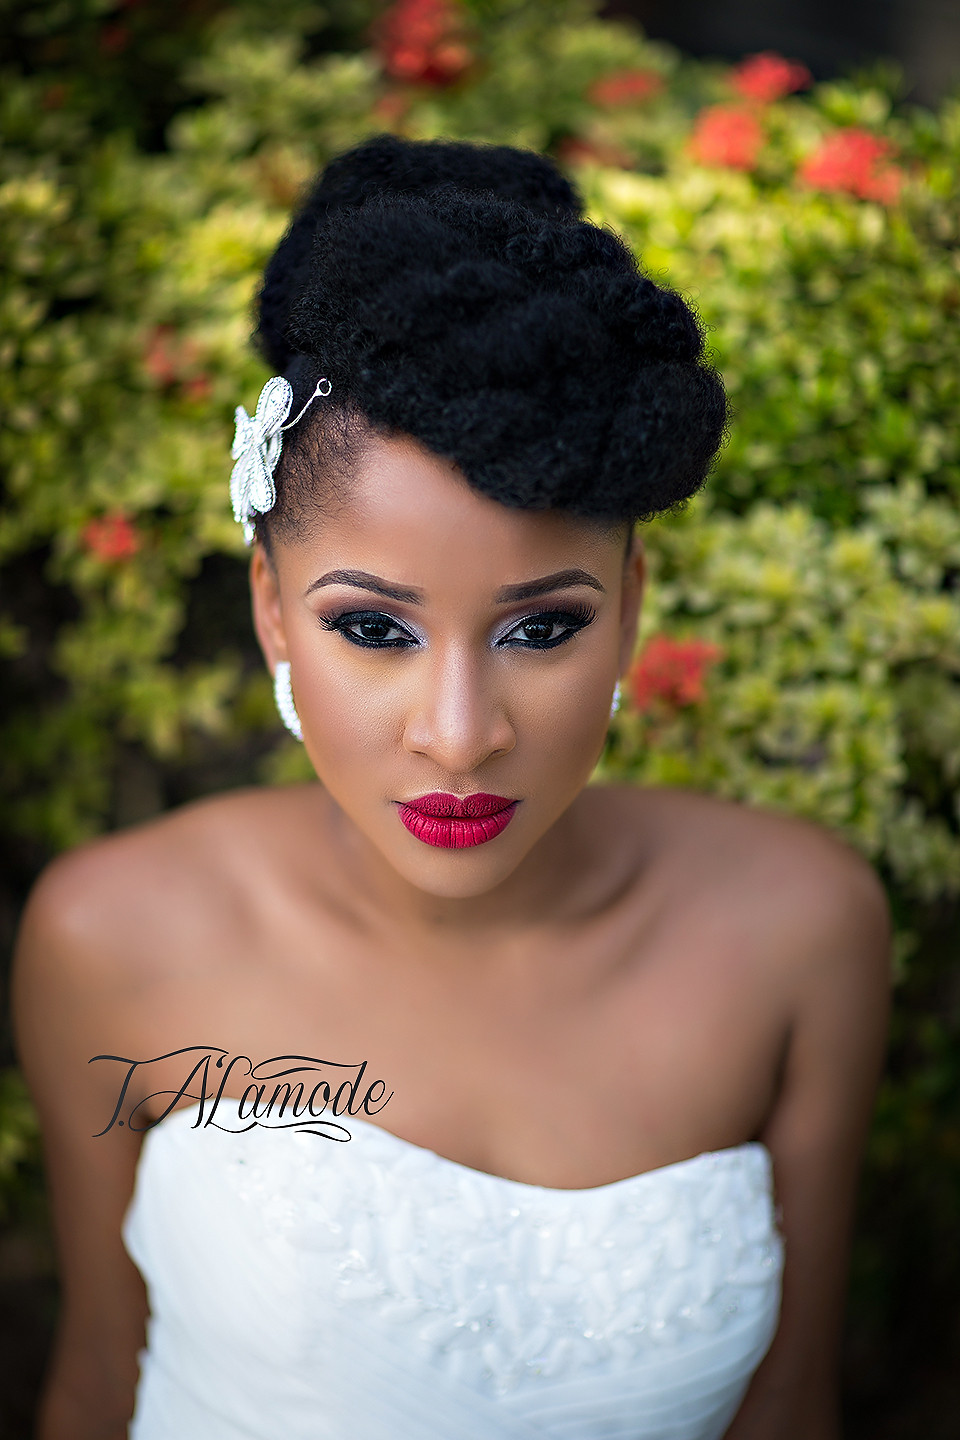 Black Natural Wedding Hairstyles
 Striking Natural Hair Looks for the 2015 Bride T Alamode